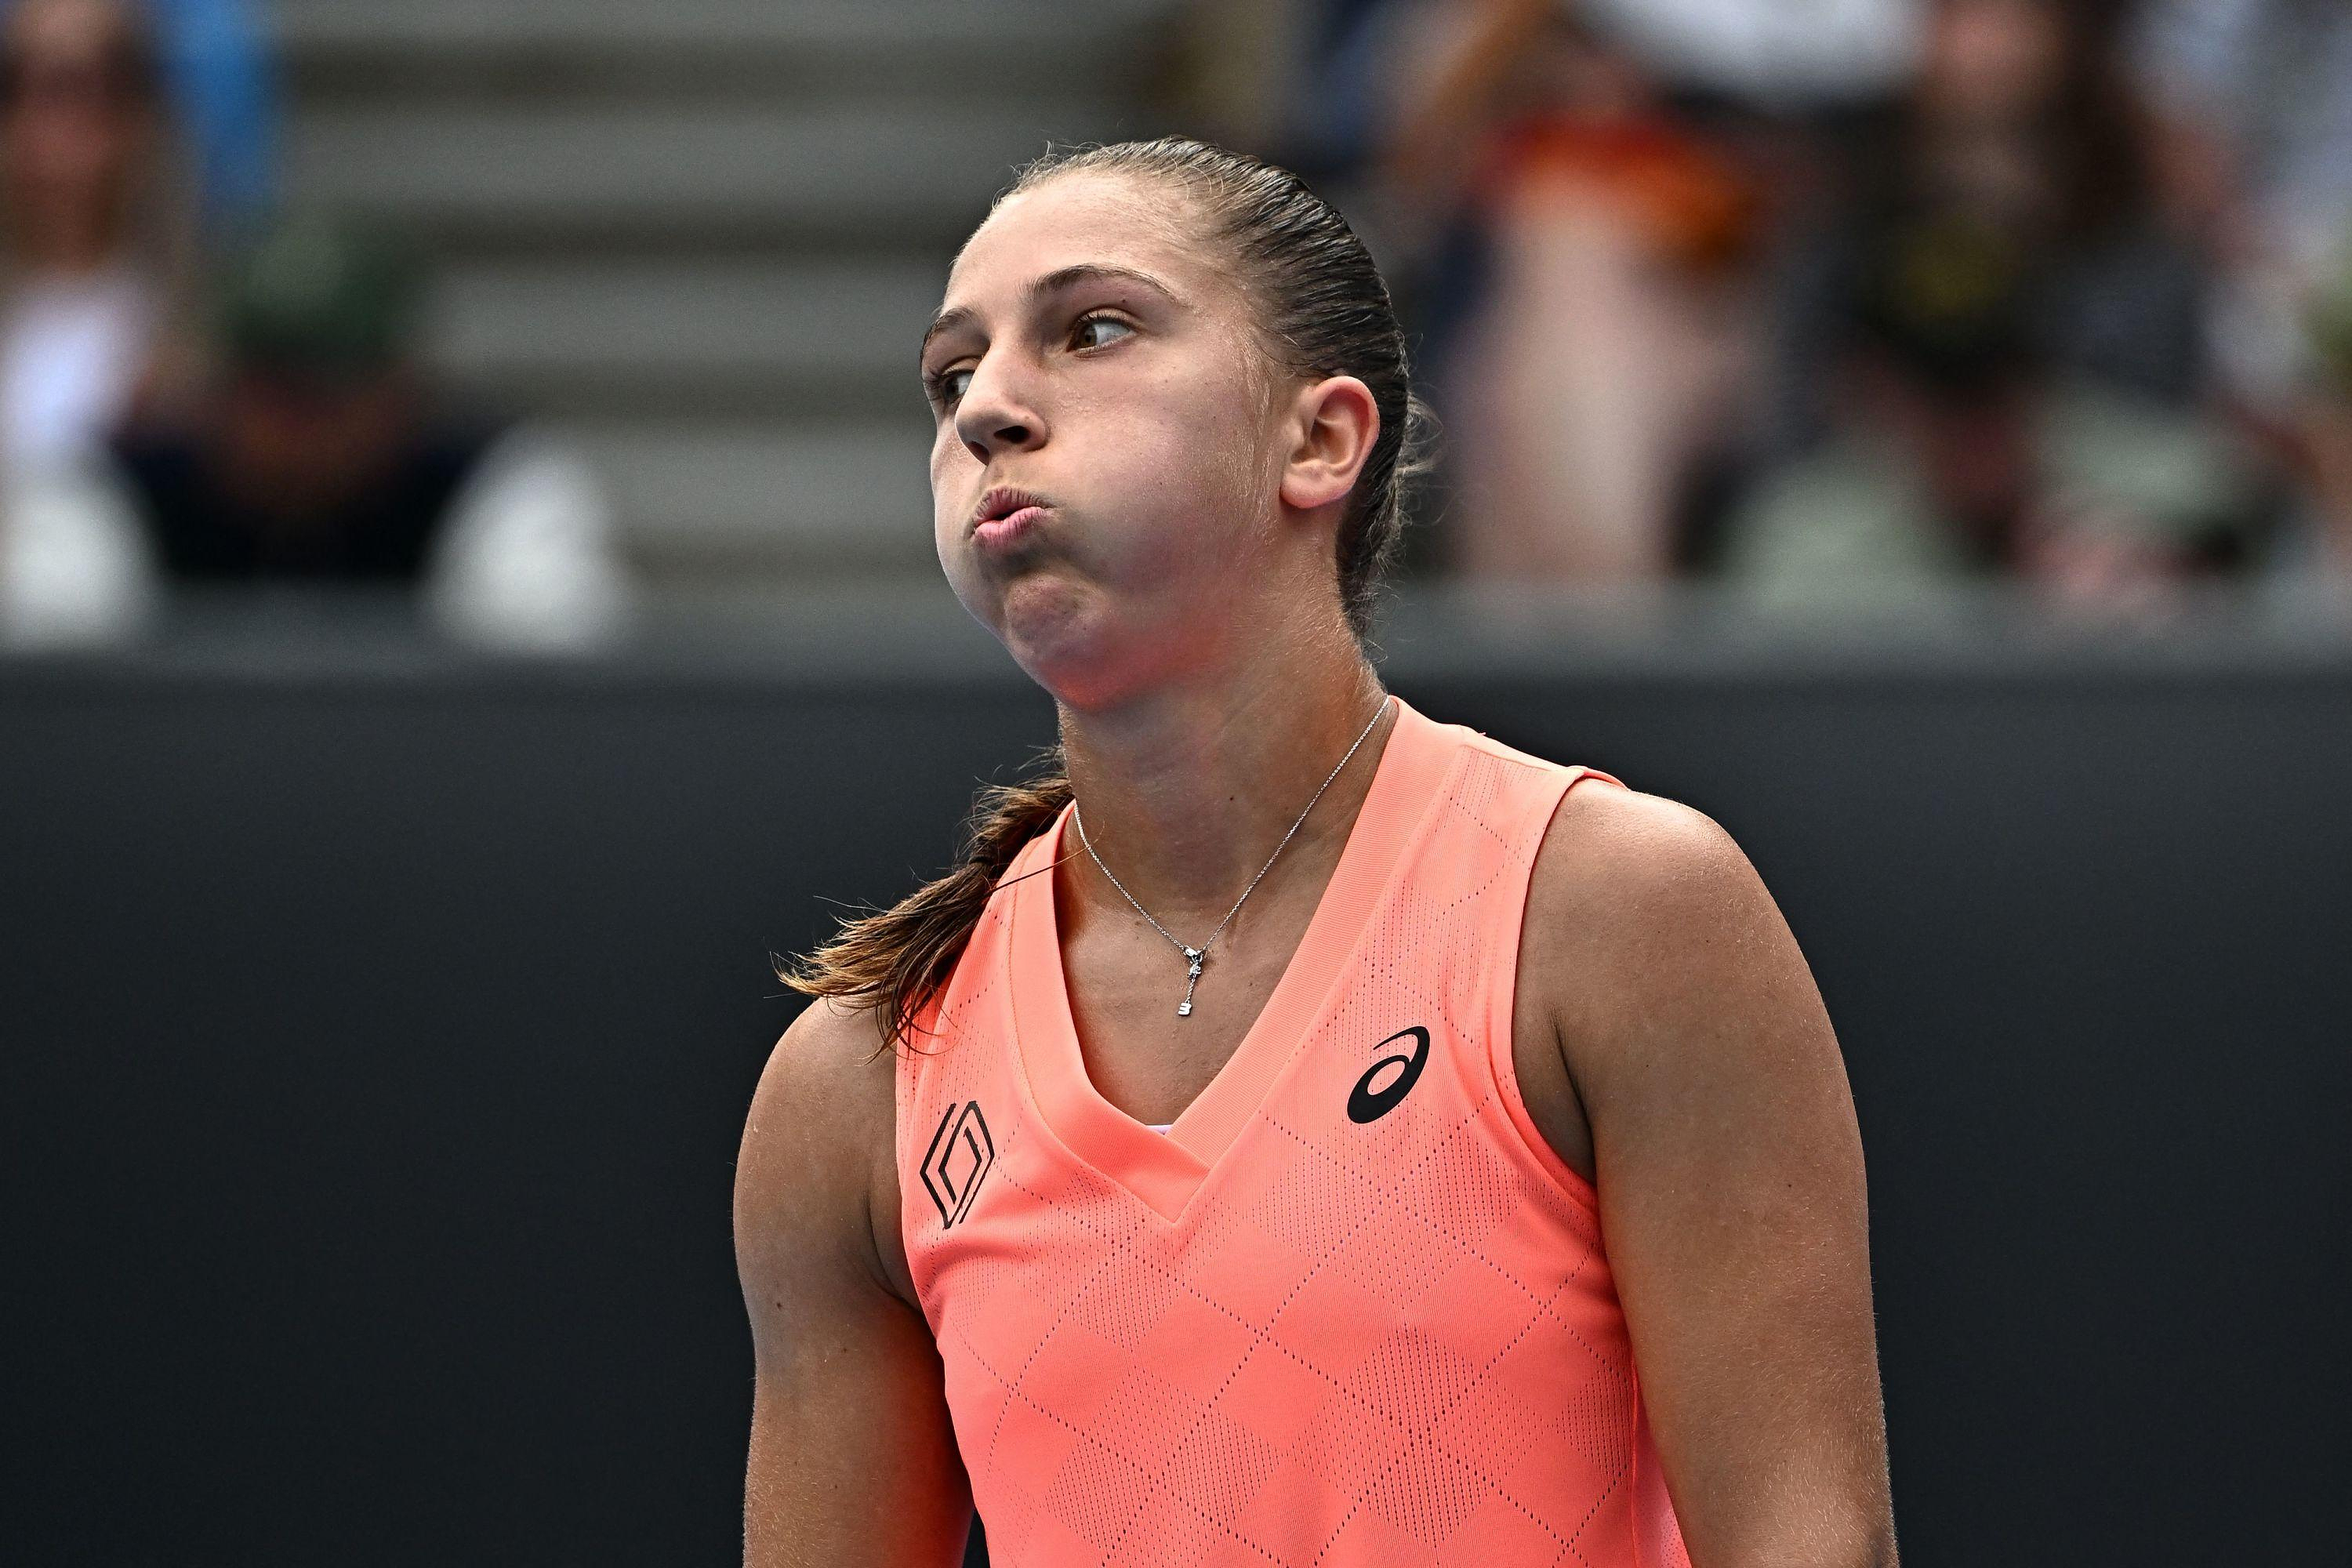 Australian Open: Parry, Sinner, Sabalenka... what to remember from the night in Melbourne